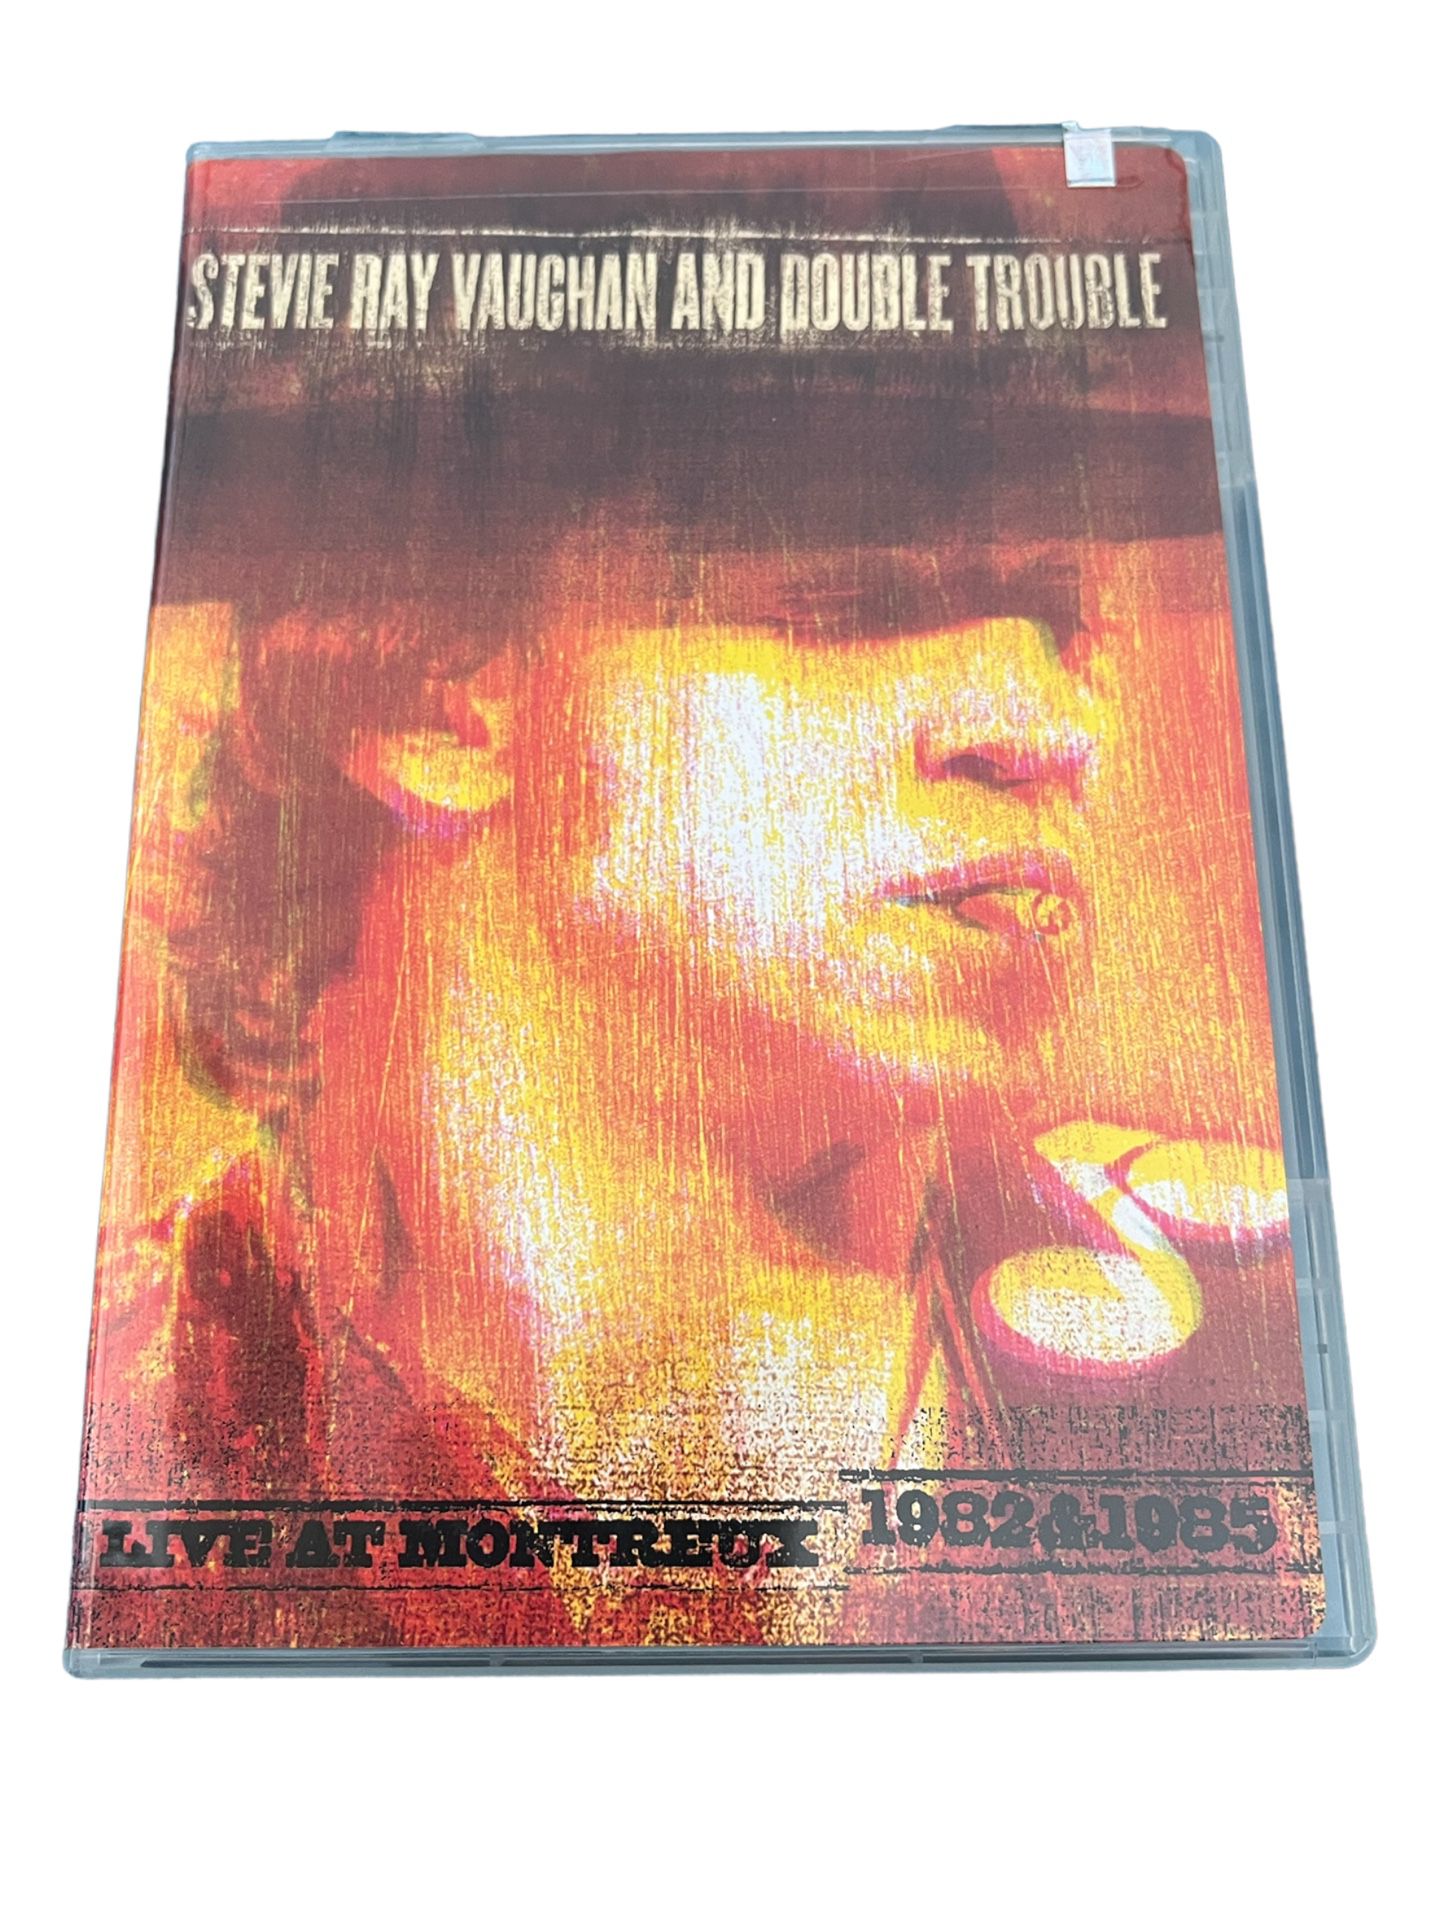 Stevie Ray Vaughan and Double Trouble - Live At Montreux 1(contact info removed) (DVD, 2004).  Epic Records B15 